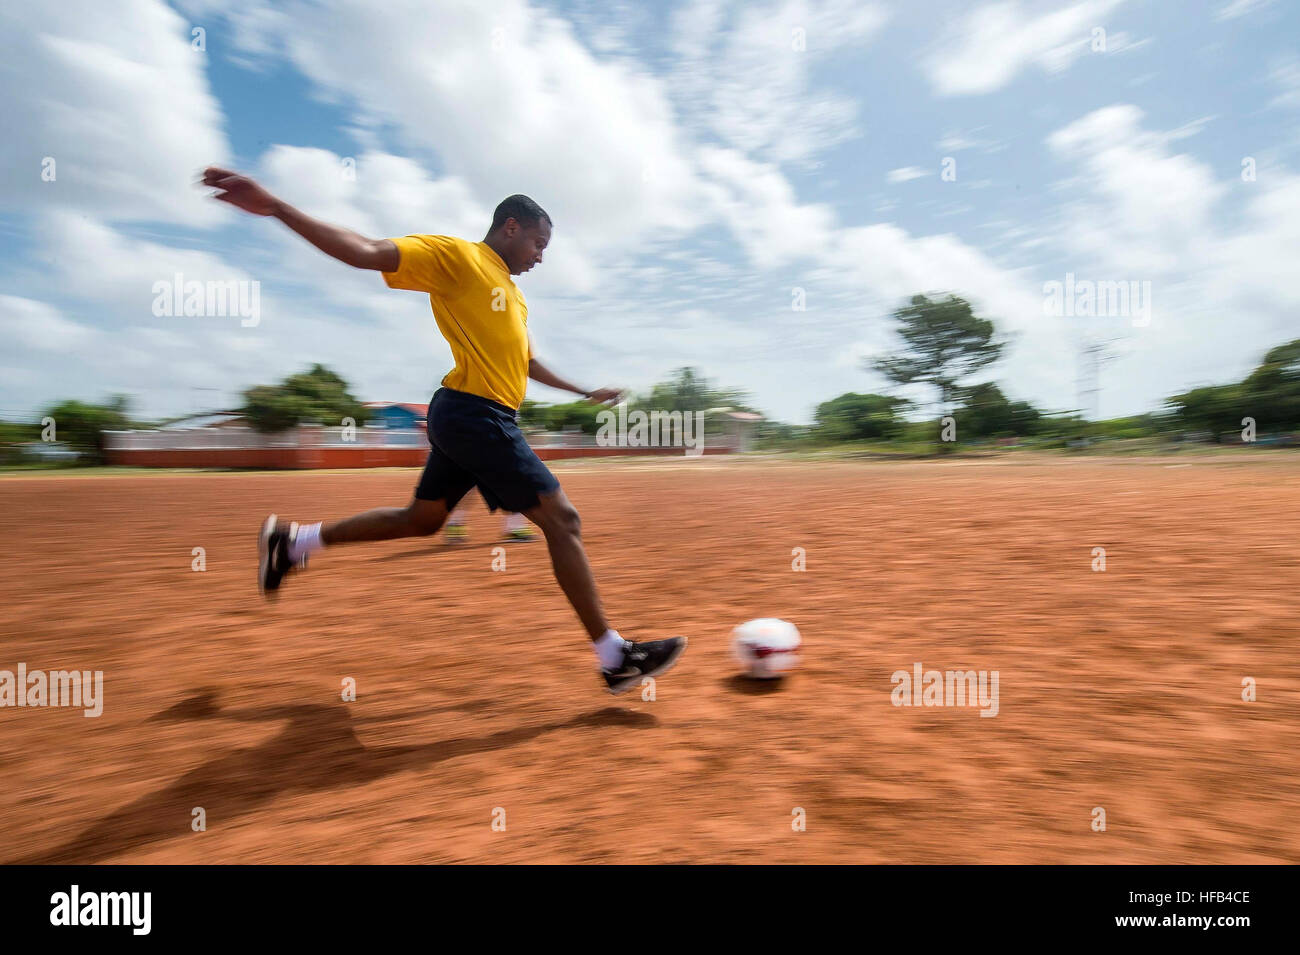 150520-N-XQ474-037 PUERTO CABEZAS, Nicaragua (May 20, 2015) Hospital Corpsman 3rd Class Sewagegn Sintayehu, a native of Silver Spring, Md., assigned to Naval Hospital Camp Lejeune, N.C., participates in a community soccer game with local  citizens in support of Continuing Promise 2015. Continuing Promise is a U.S. Southern Command-sponsored and U.S. Naval Forces Southern Command/U.S. 4th Fleet-conducted deployment to conduct civil-military operations including humanitarian-civil assistance, subject matter expert exchanges, medical, dental, veterinary and engineering support and disaster respon Stock Photo